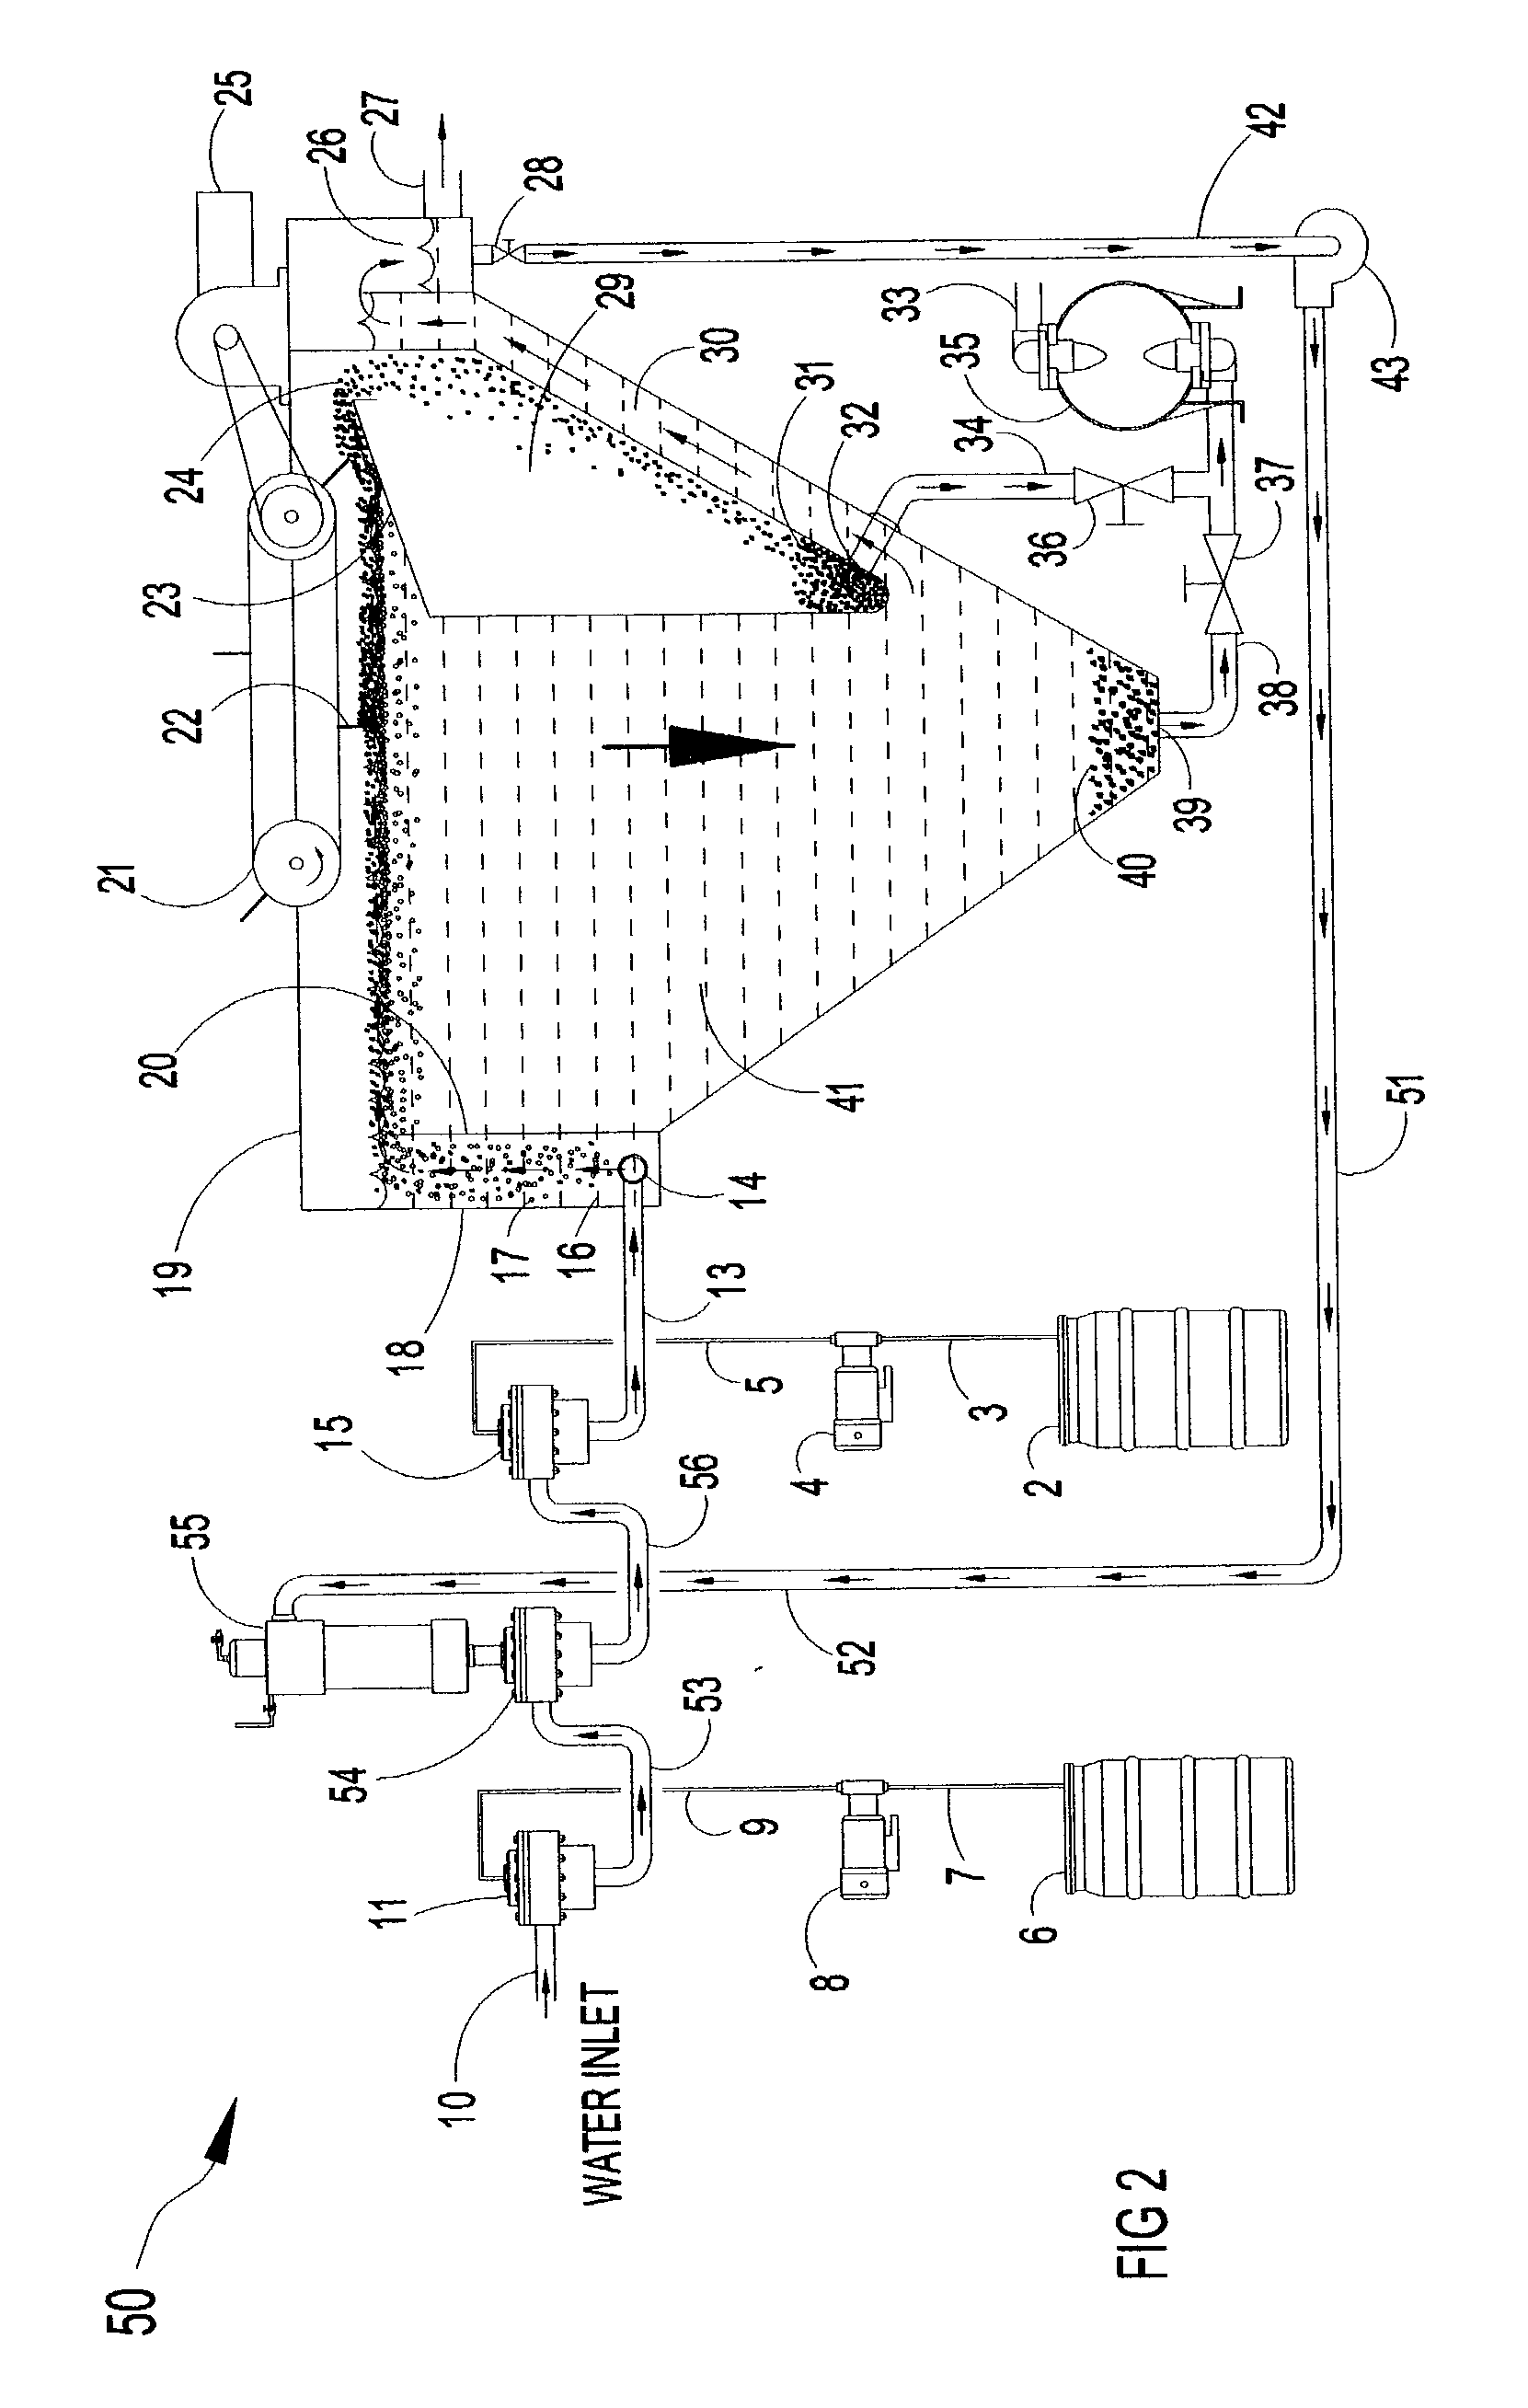 Methods and apparatus for separation of solids from liquids by dissolved gas floatation